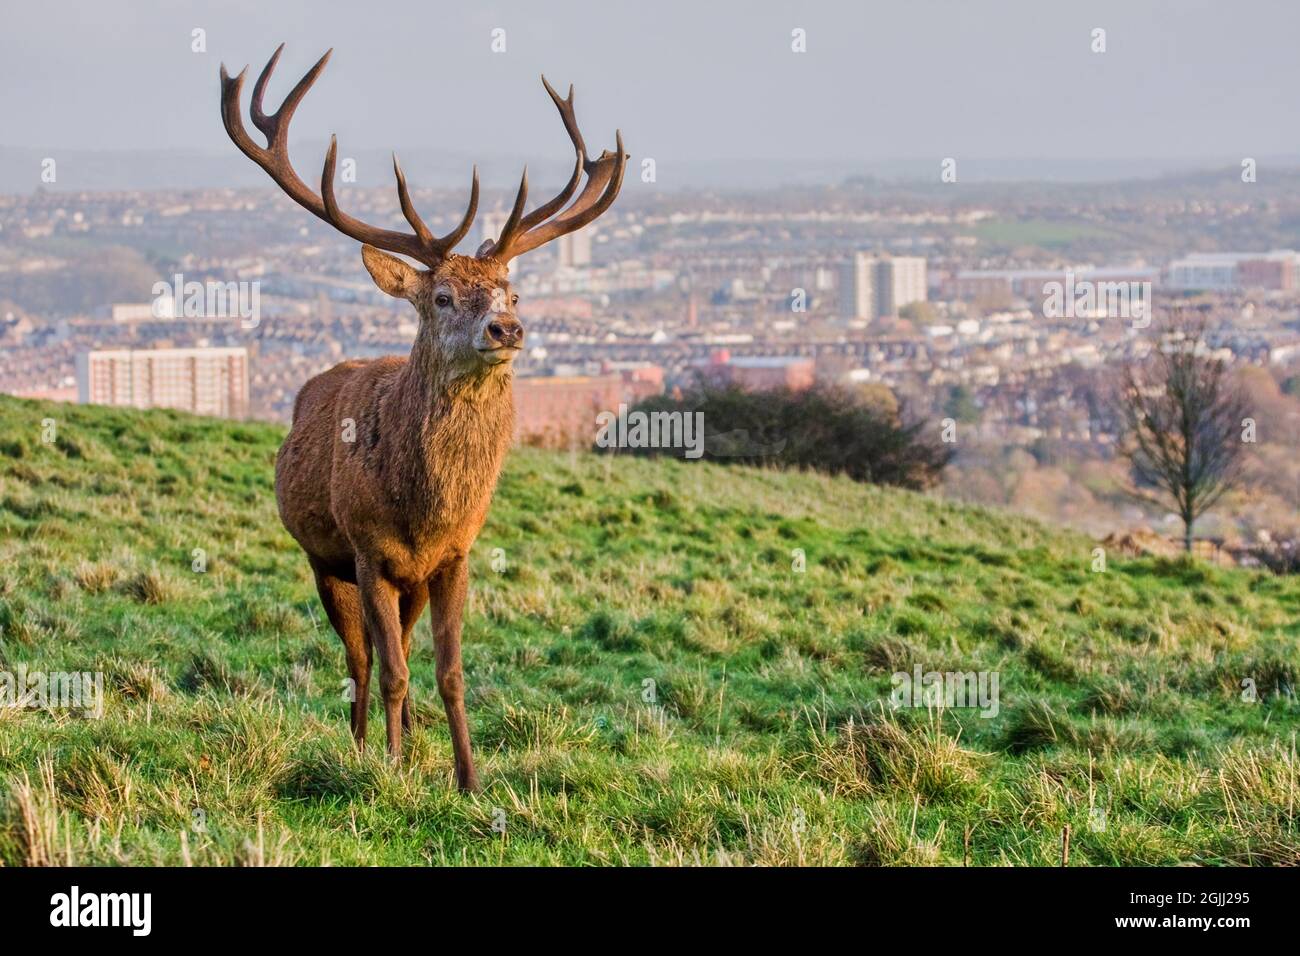 Red deer stag Cervus elaphus in the deer park at Ashton court with the city of Bristol in the distance - Bristol UK Stock Photo